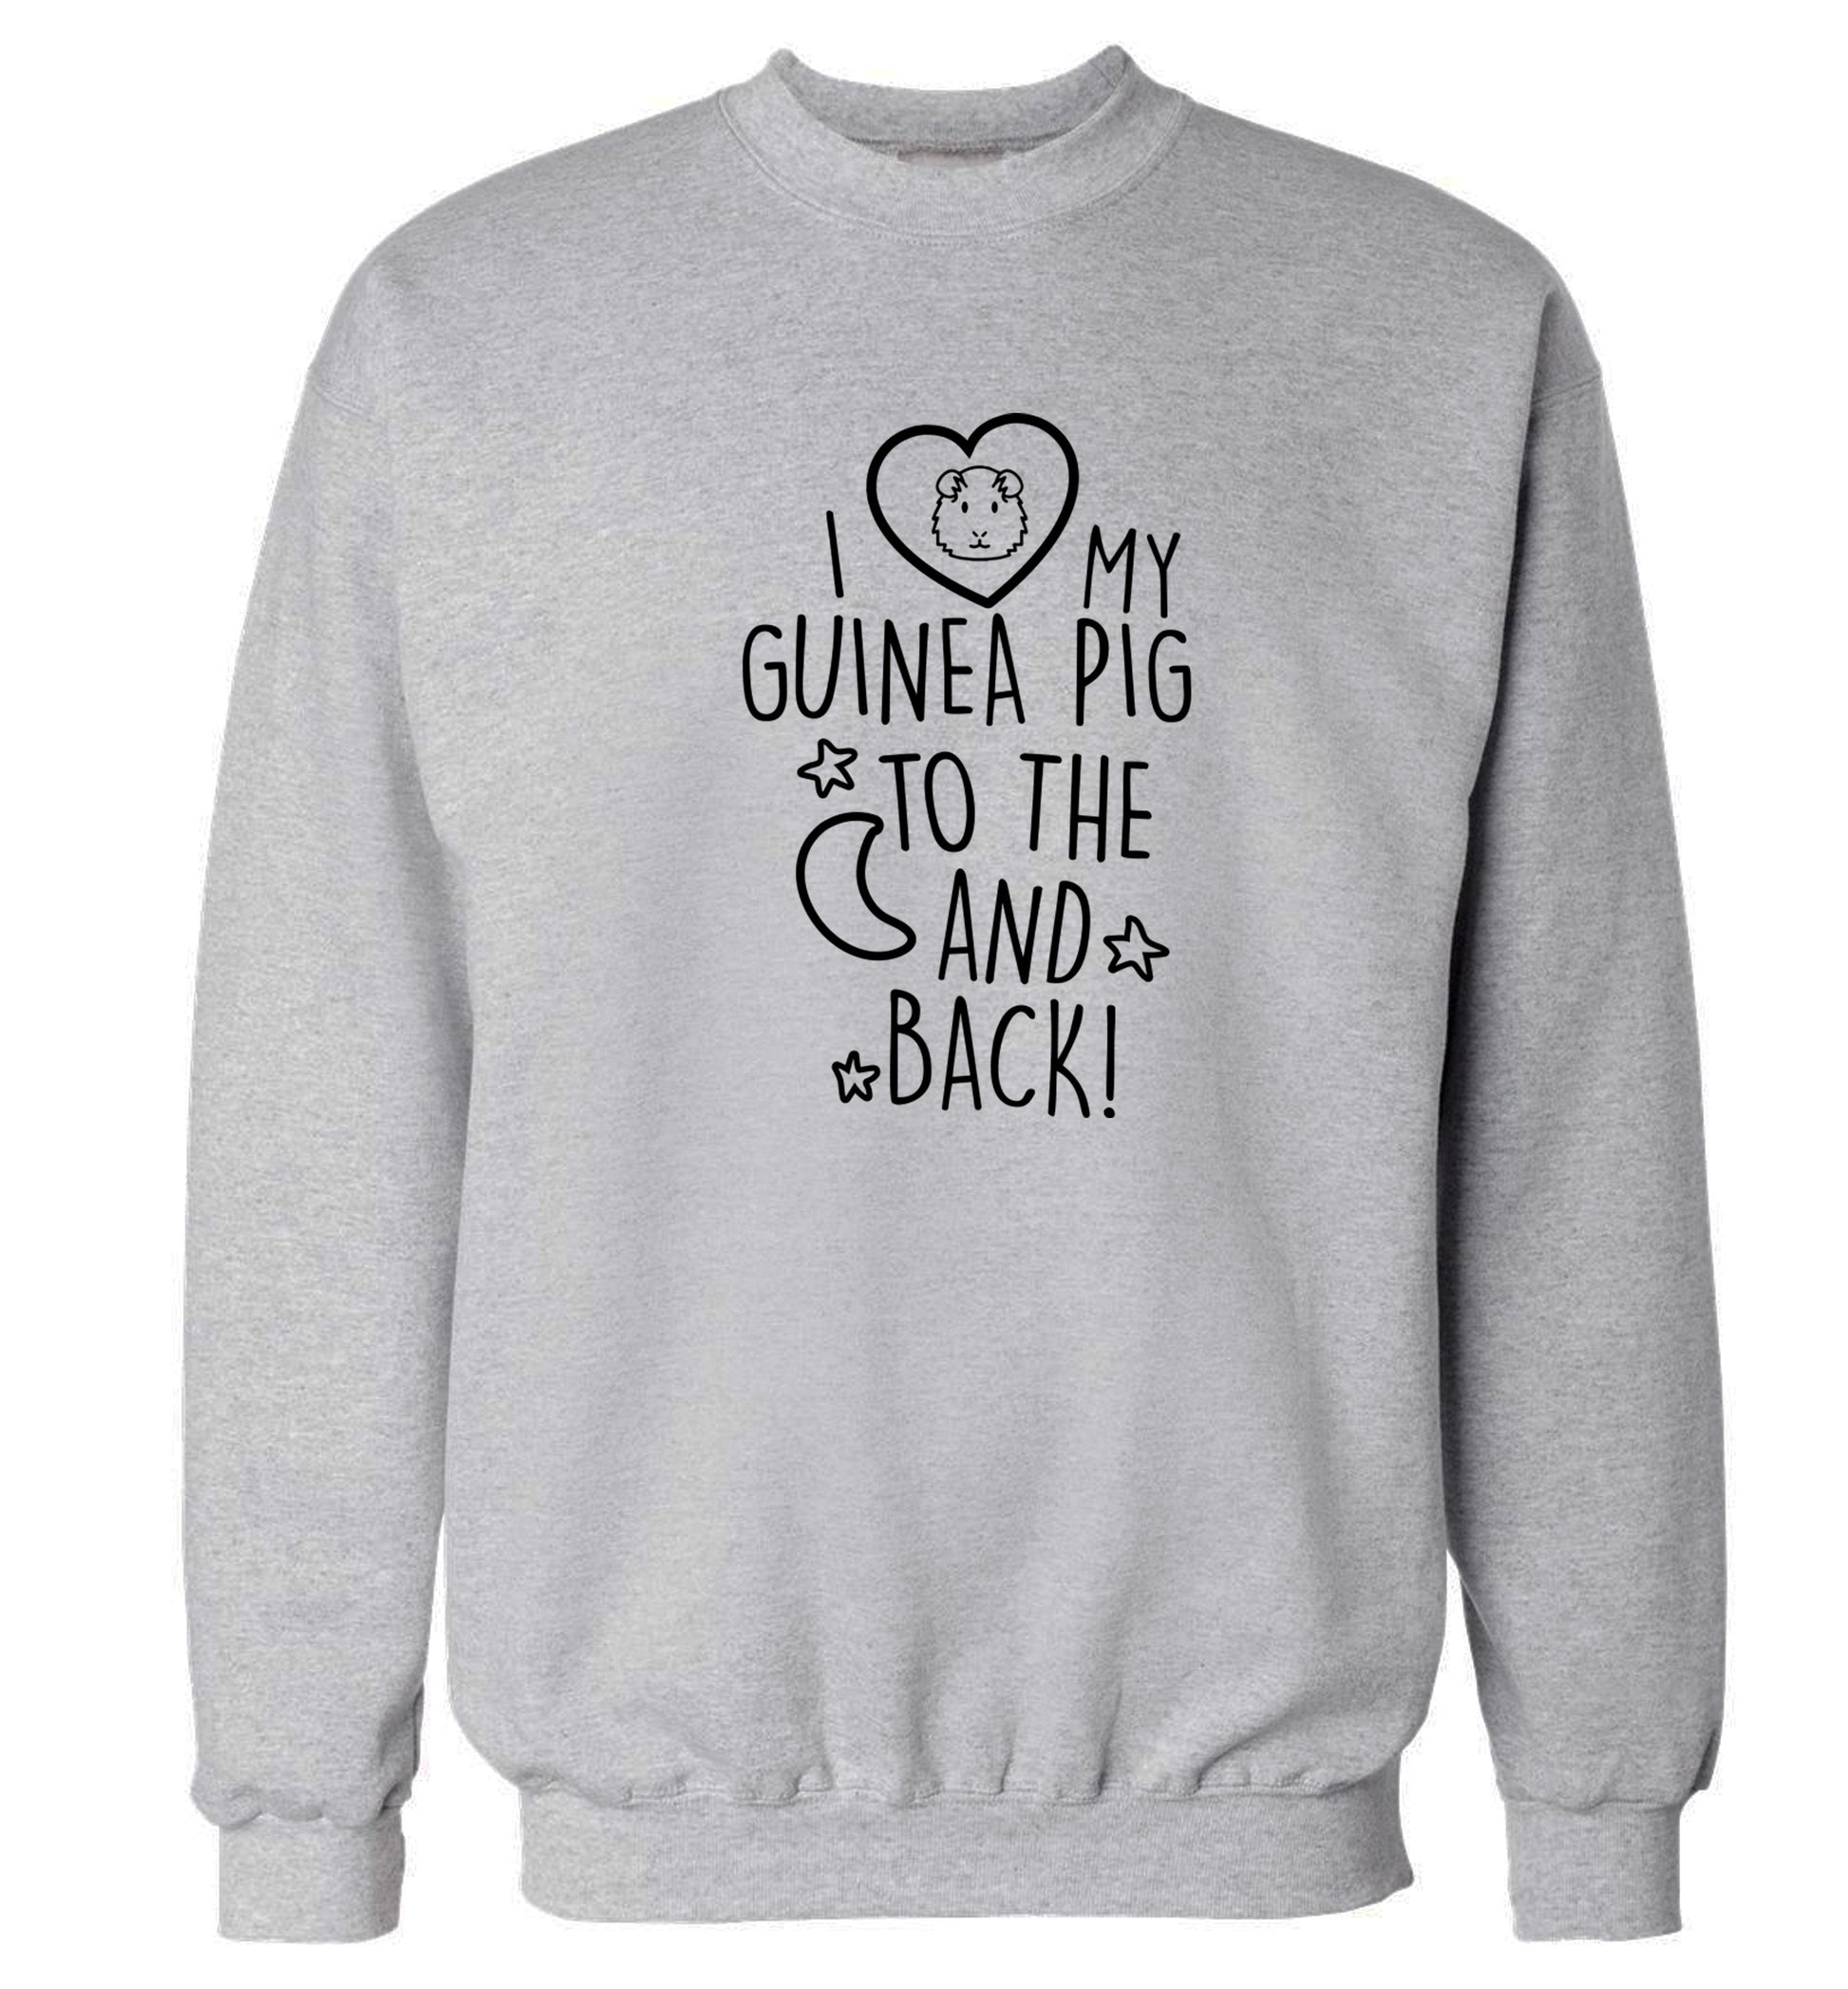 I love my guinea pig to the moon and back Adult's unisex grey  sweater 2XL